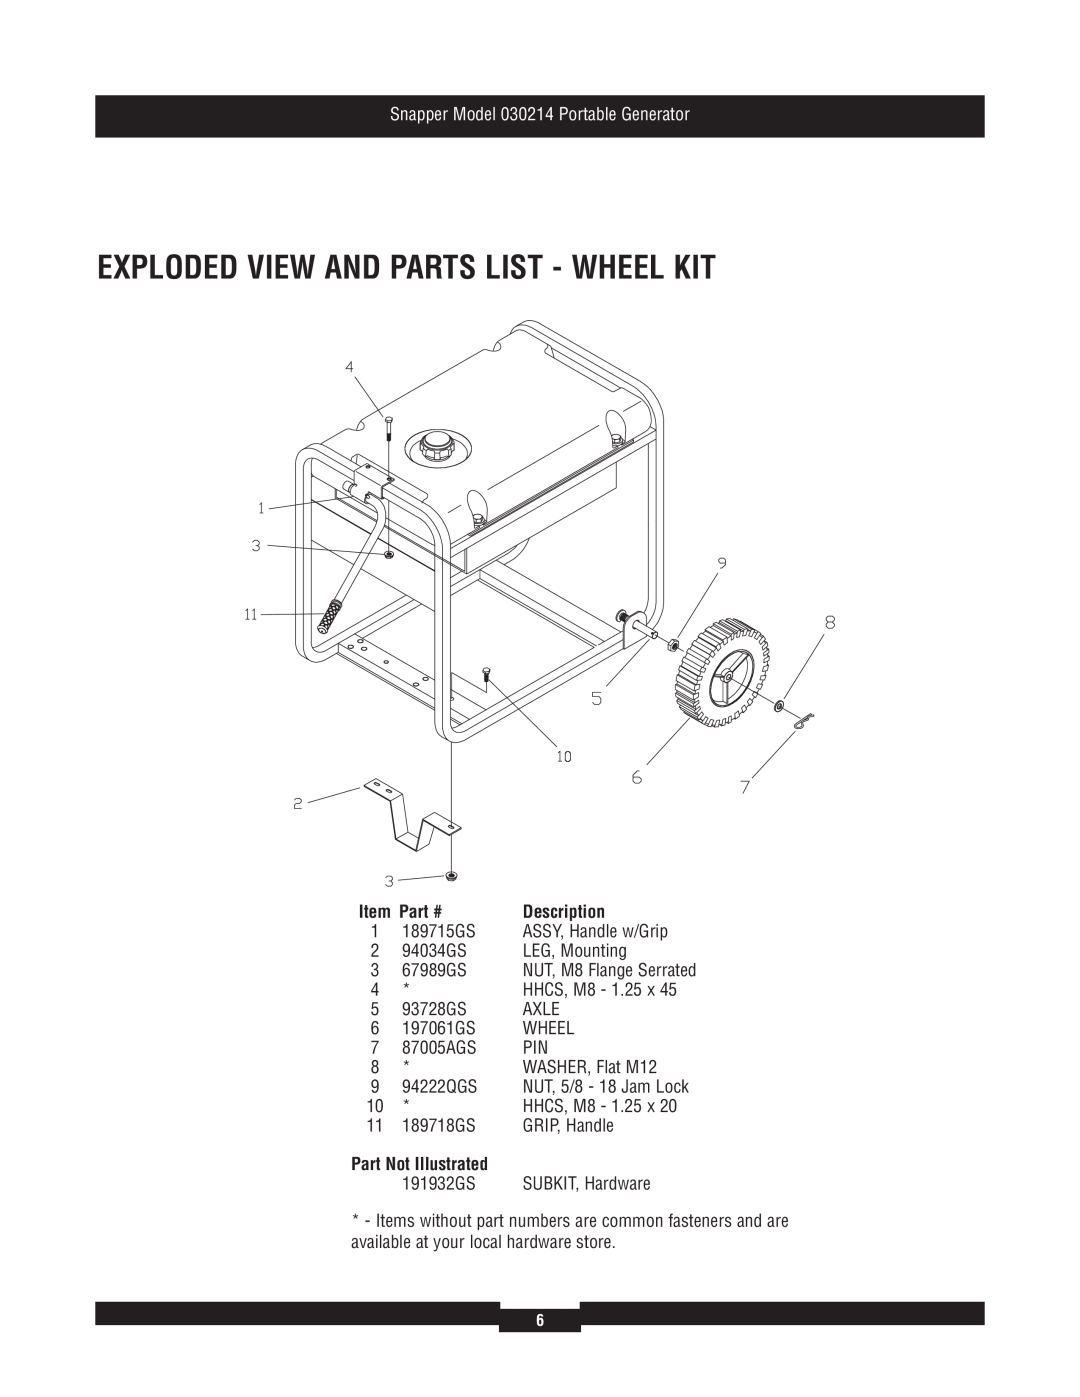 Snapper manual Exploded View And Parts List - Wheel Kit, Part Not Illustrated, Snapper Model 030214 Portable Generator 